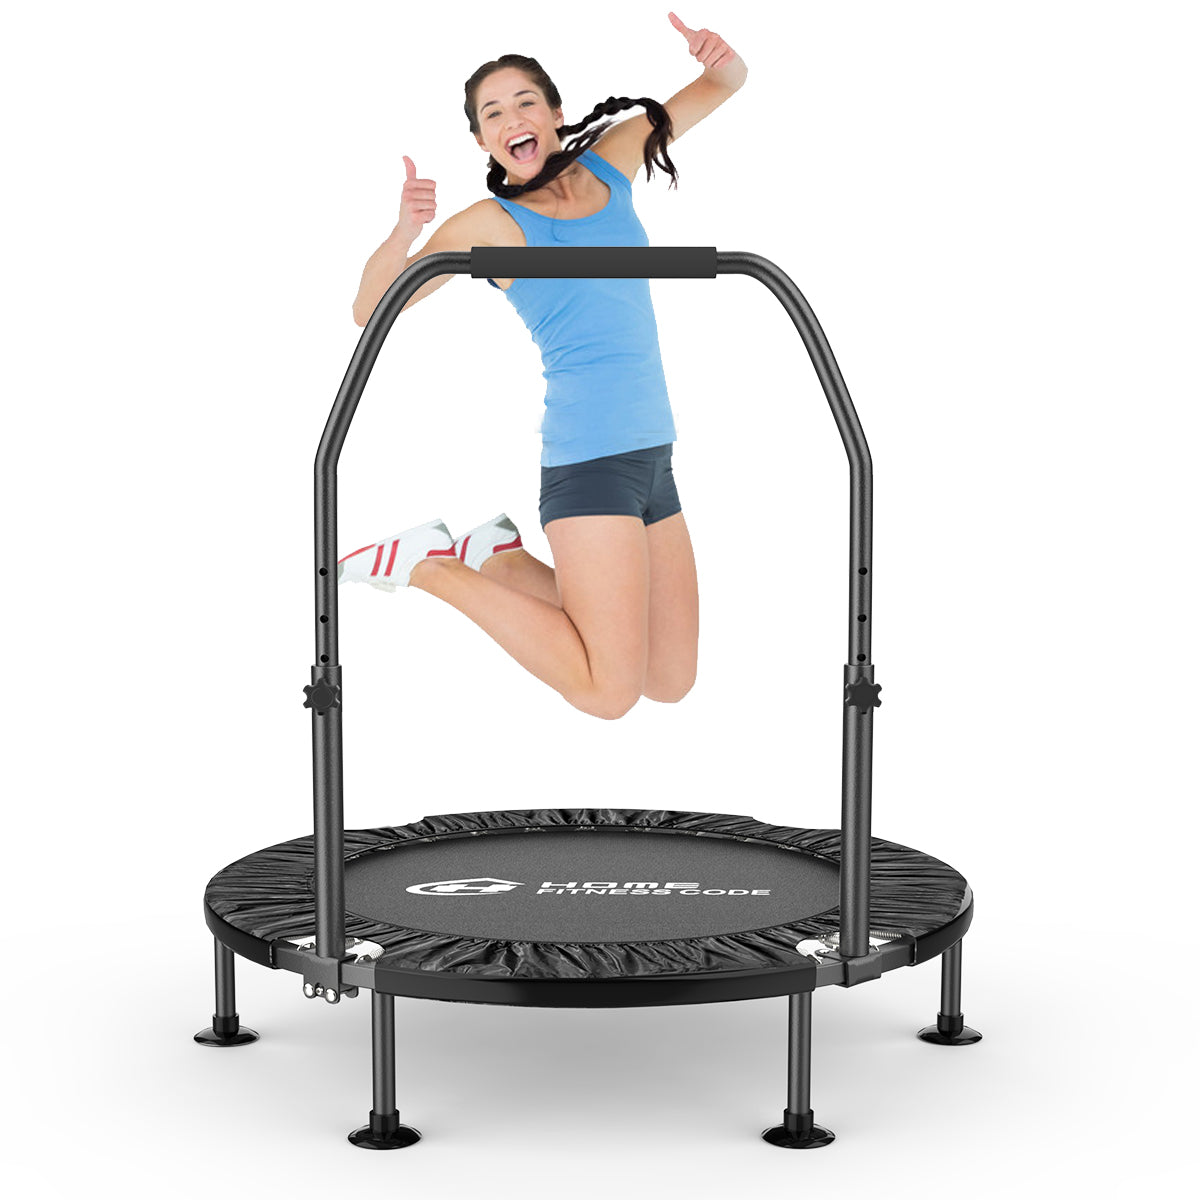 Upper Bounce Mini Exercise Trampoline for Adults and Kids Fitness